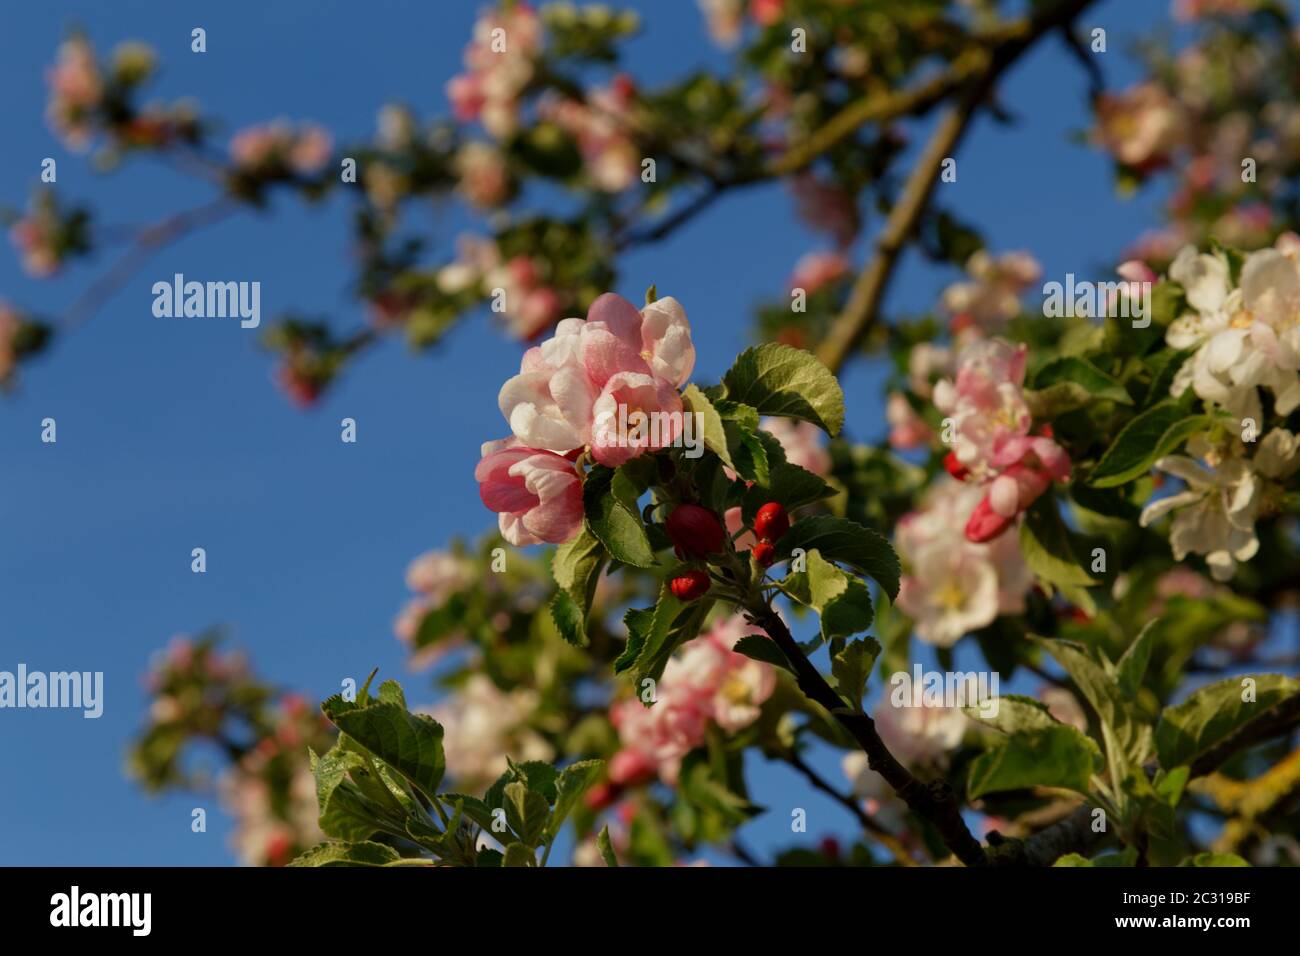 Wild Crabapple tree in flower in the English countryside against a blue sky Stock Photo